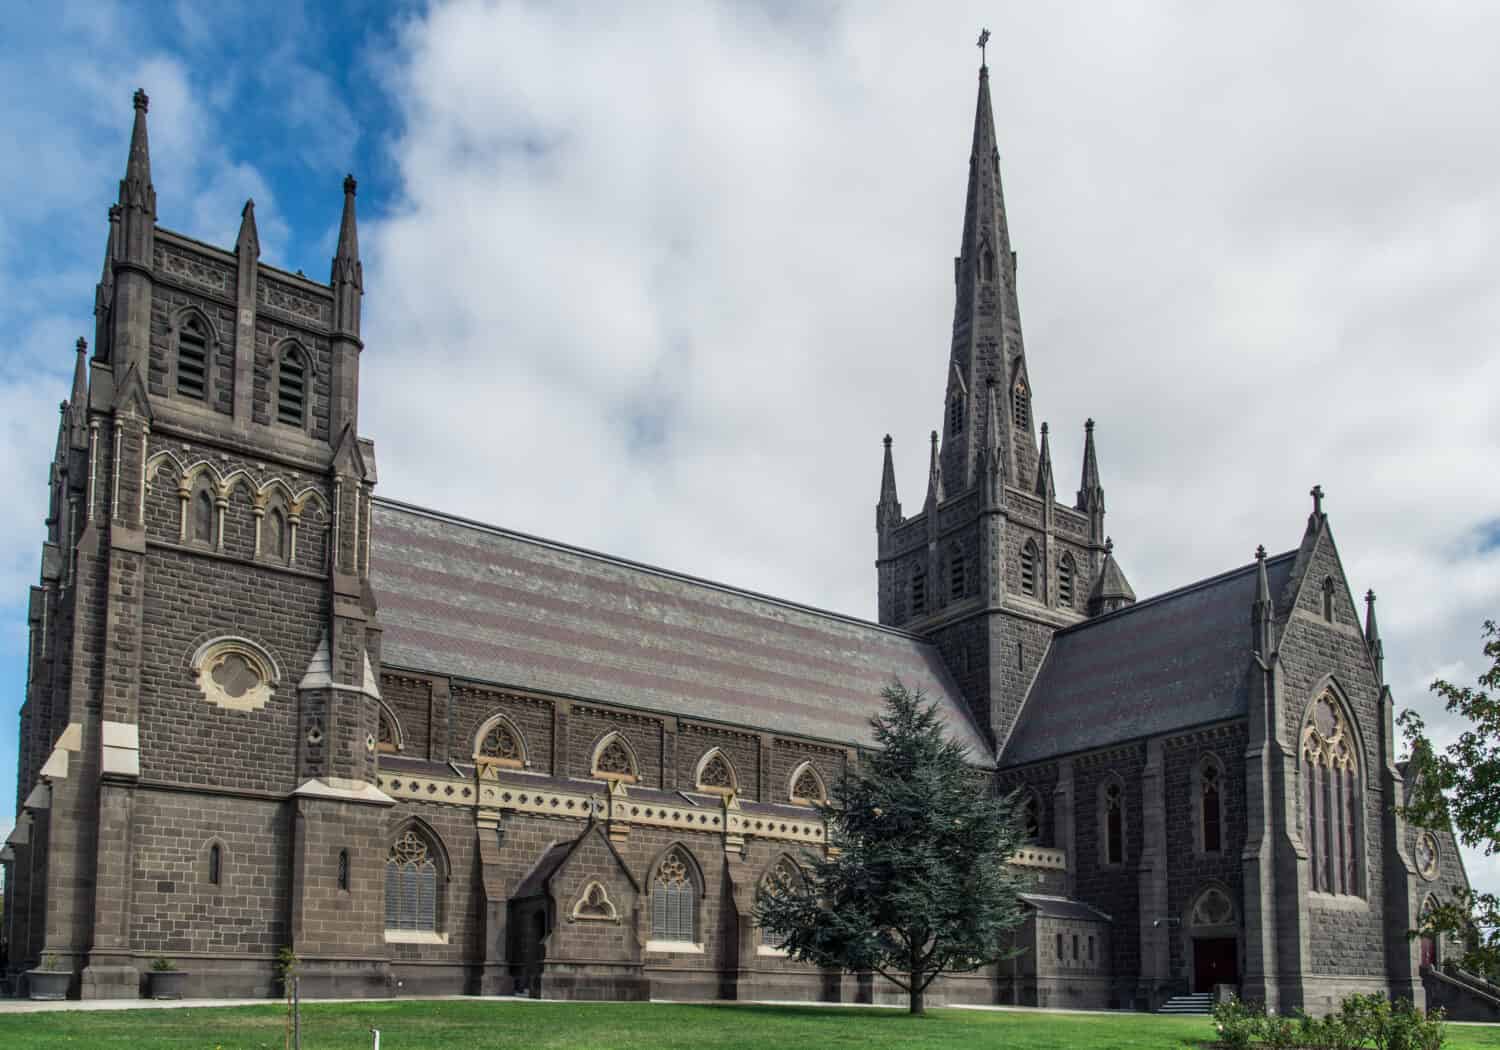 St Mary of the Angels catholic church in Geelong, Australia